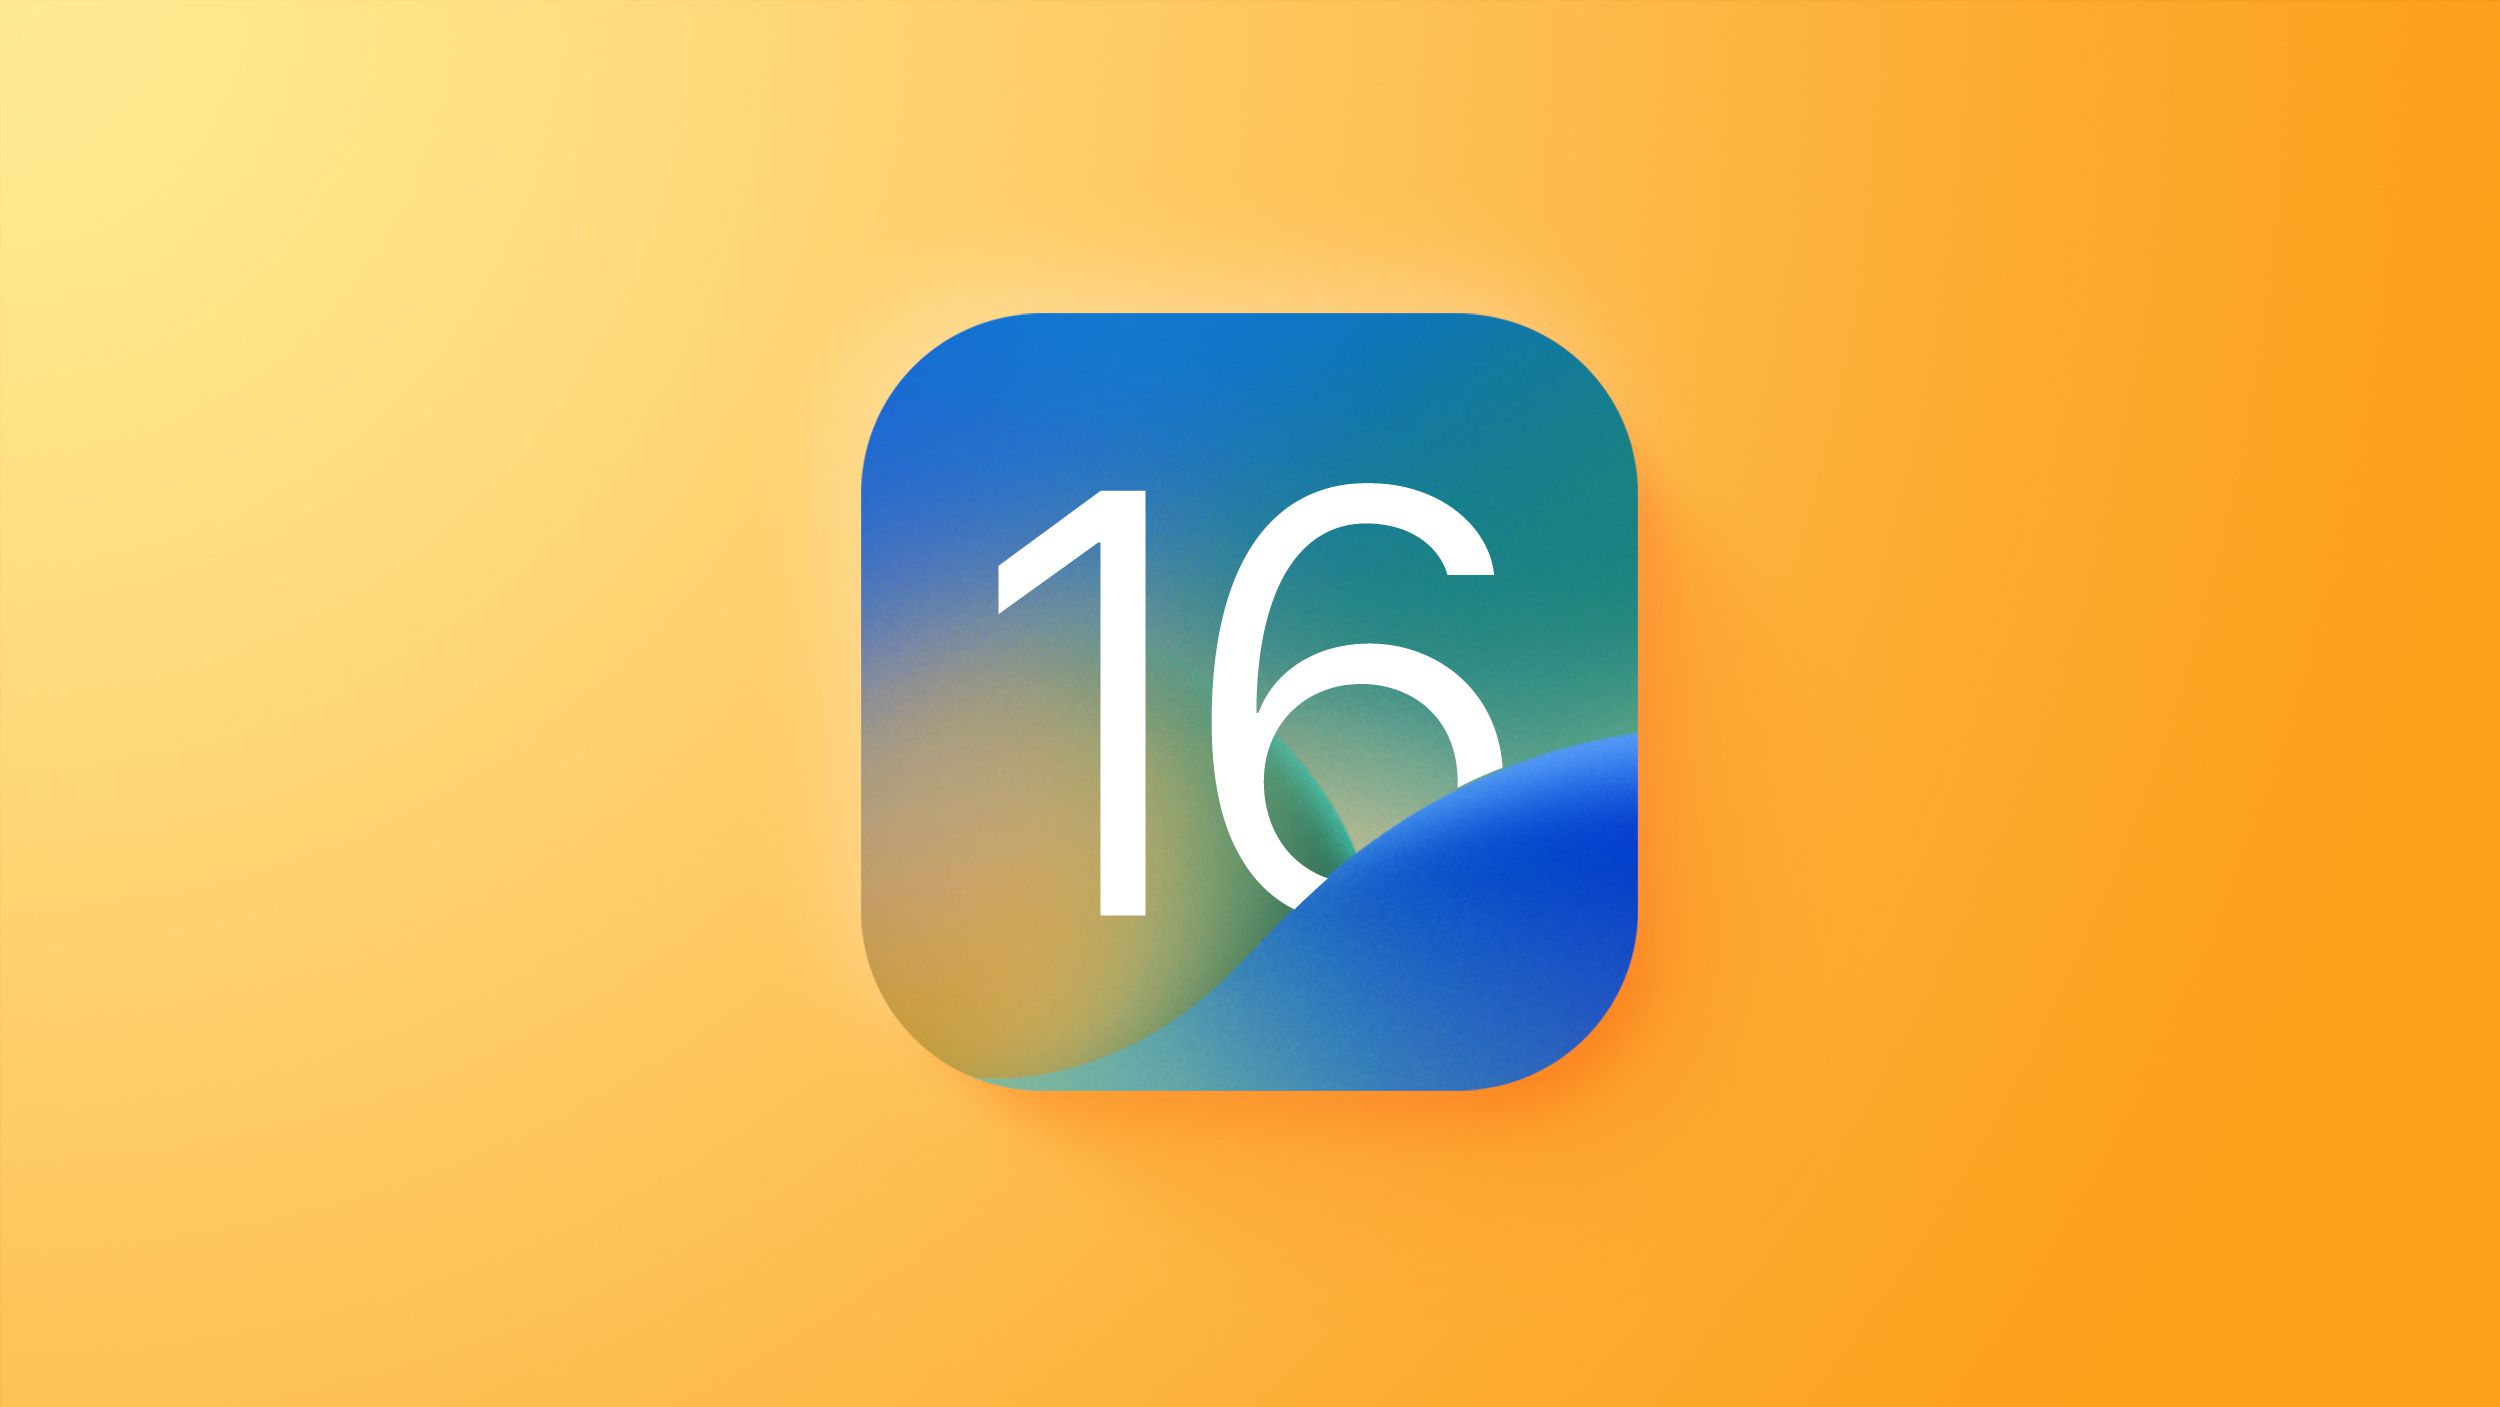 iOS 16.2 for iPhone Expected to Launch in December With These 8 New Features